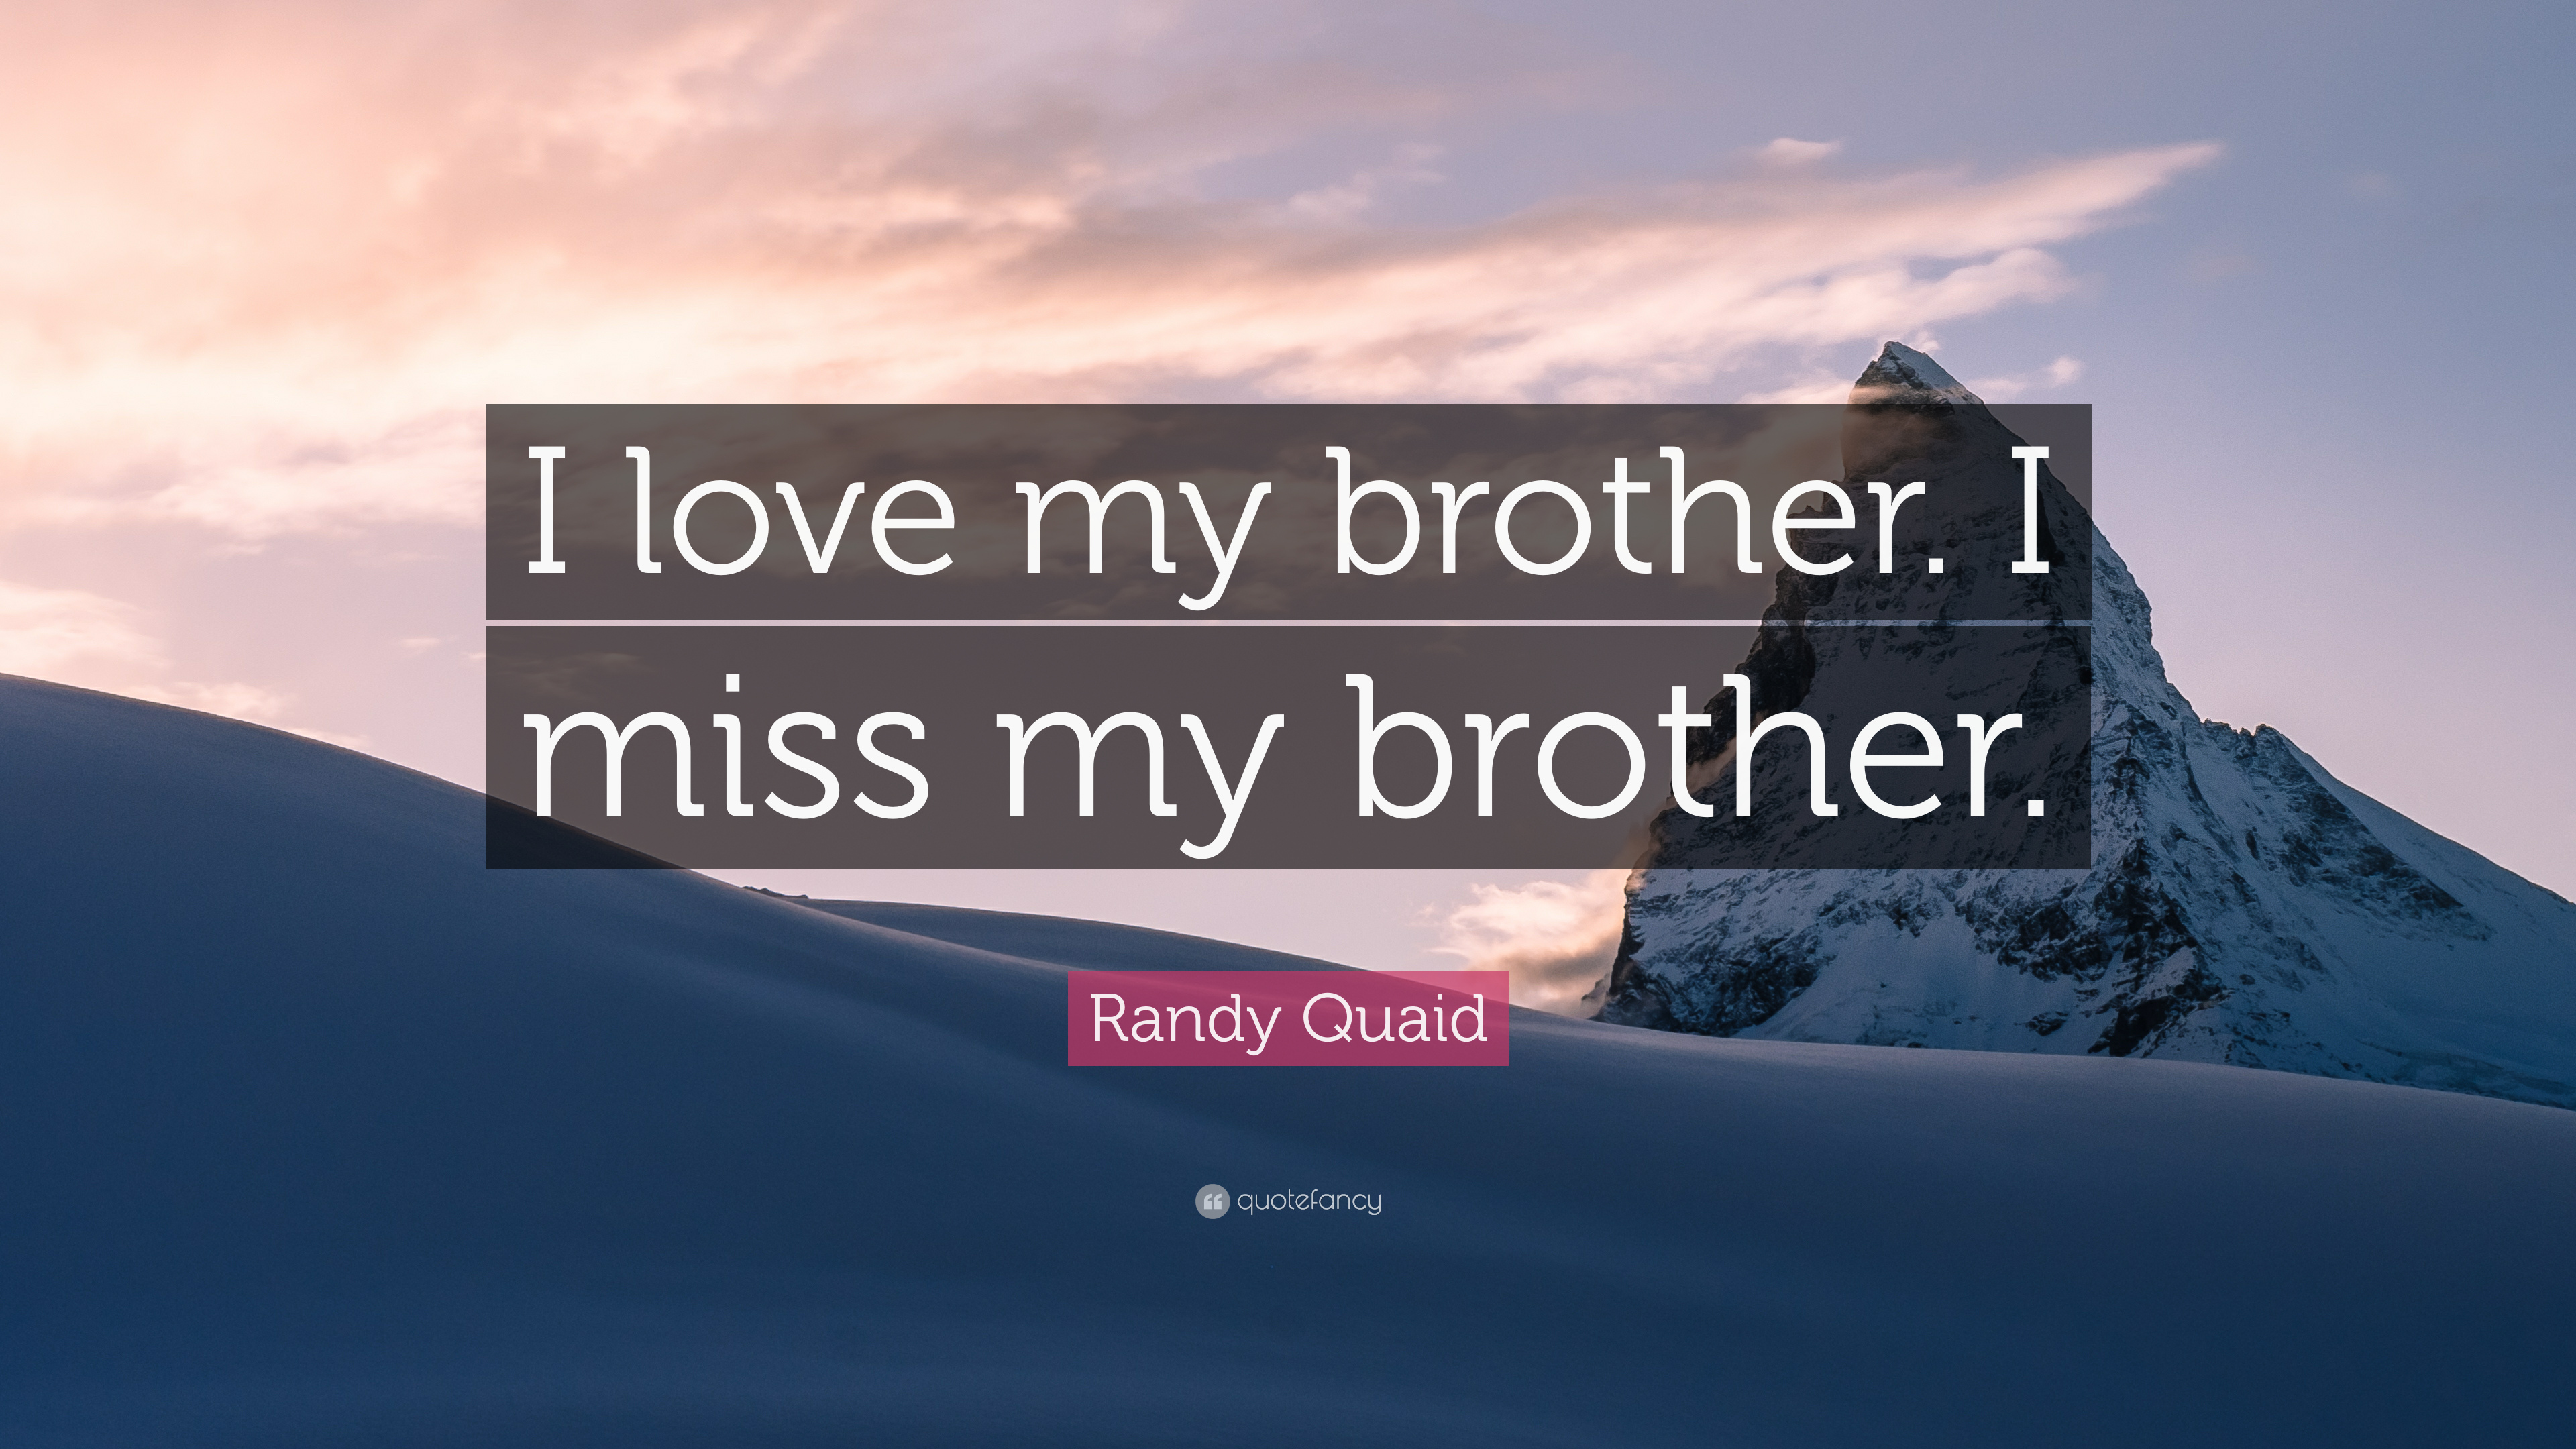 Randy Quaid Quote: “I love my brother. I miss my brother.” 9